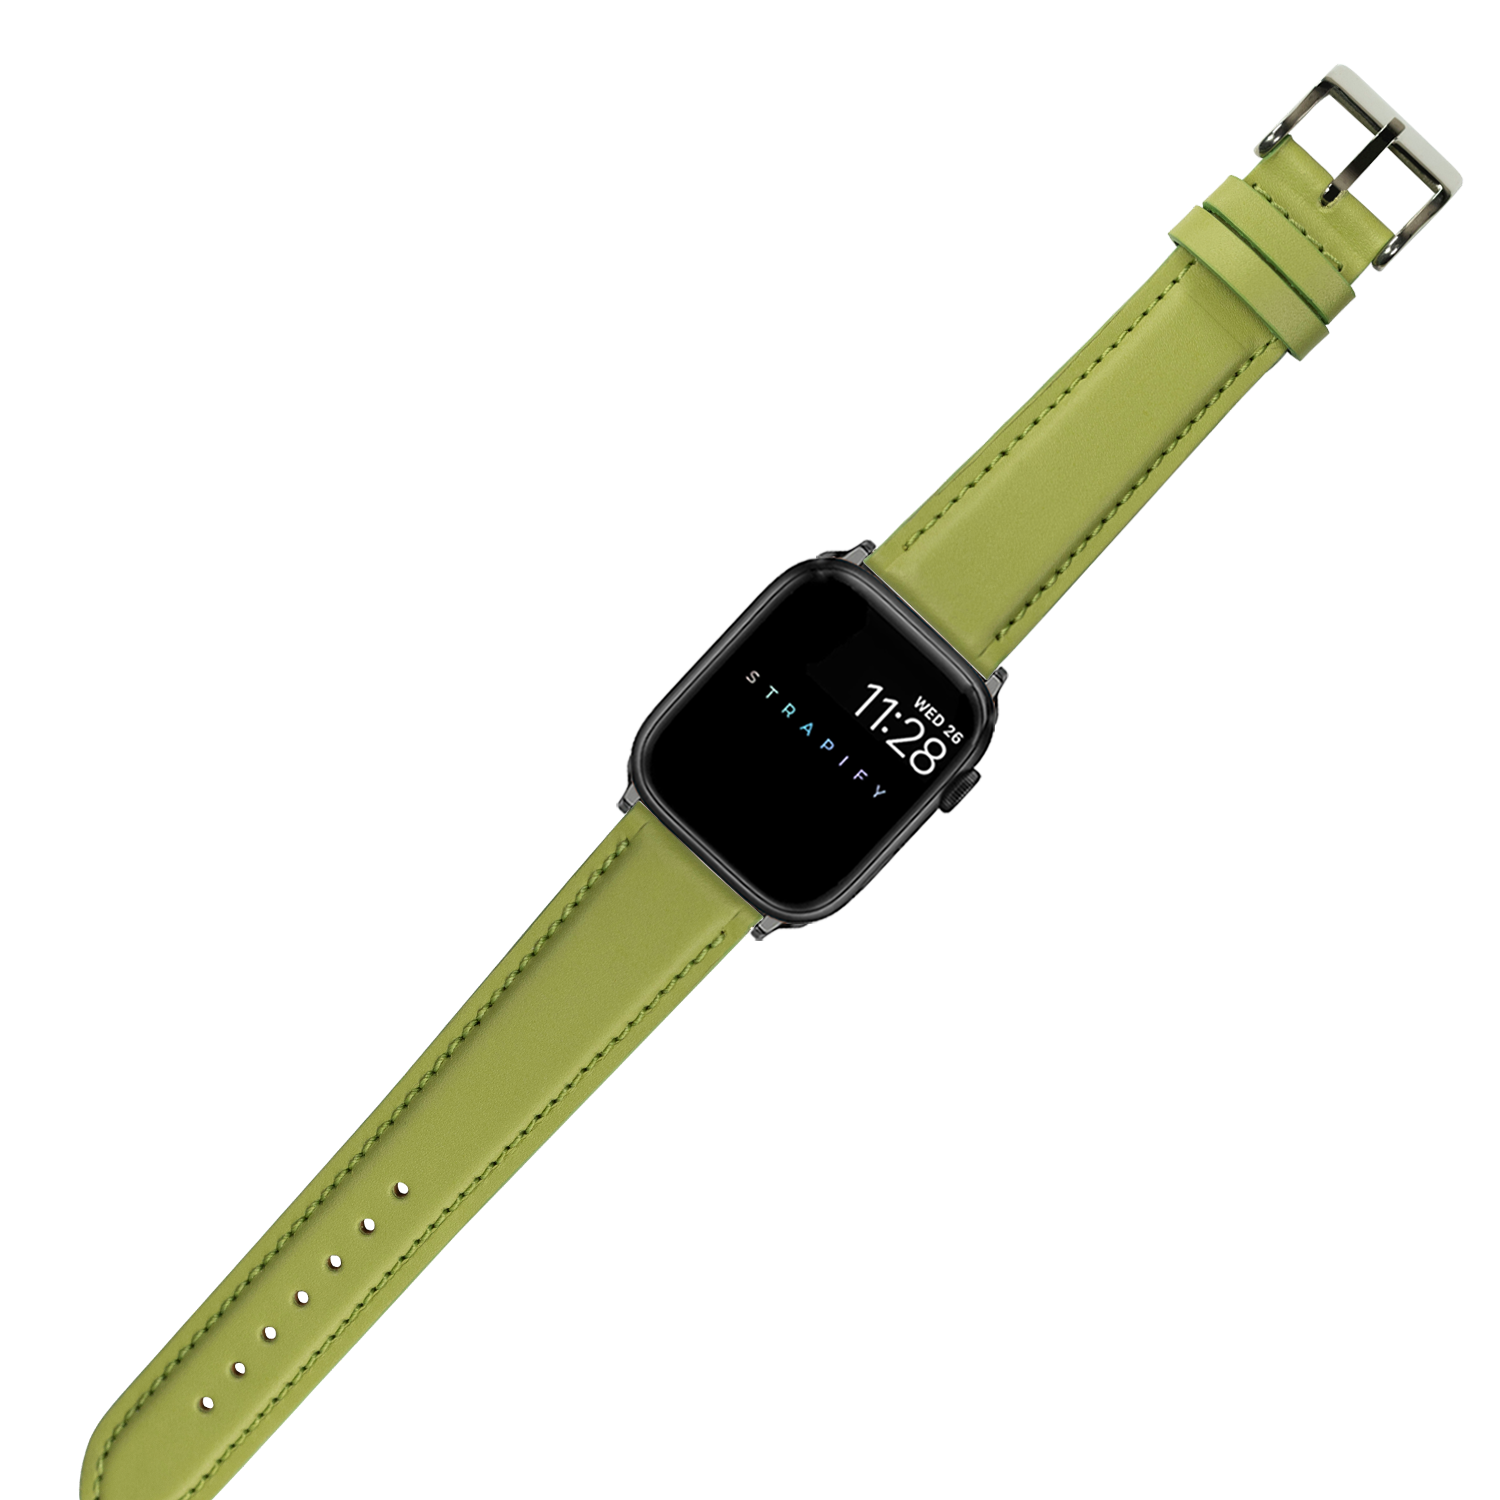 [Apple Watch] Padded Leather - Pistachio Green